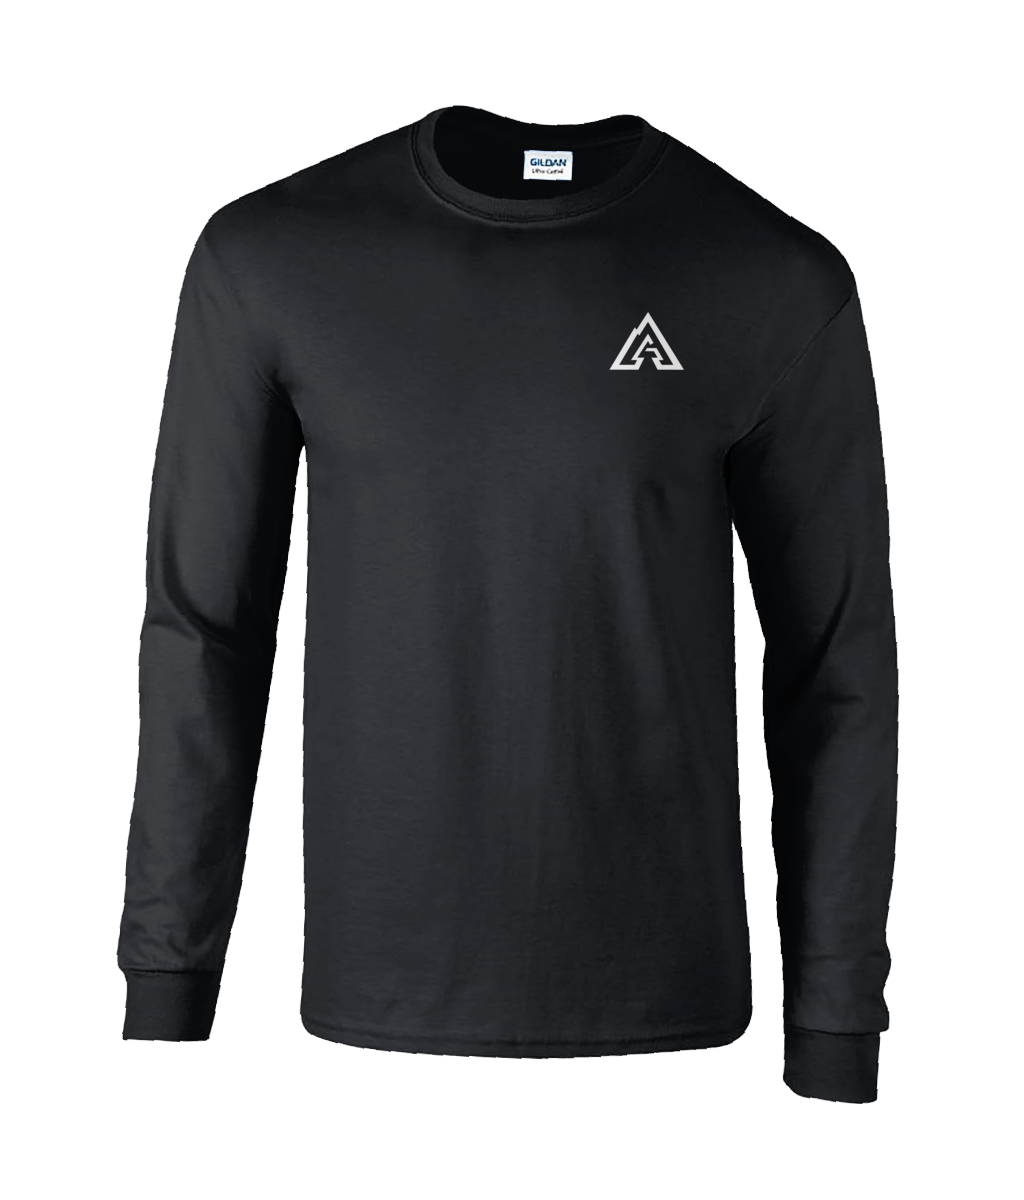 The Game Cave Long Sleeve T-Shirt